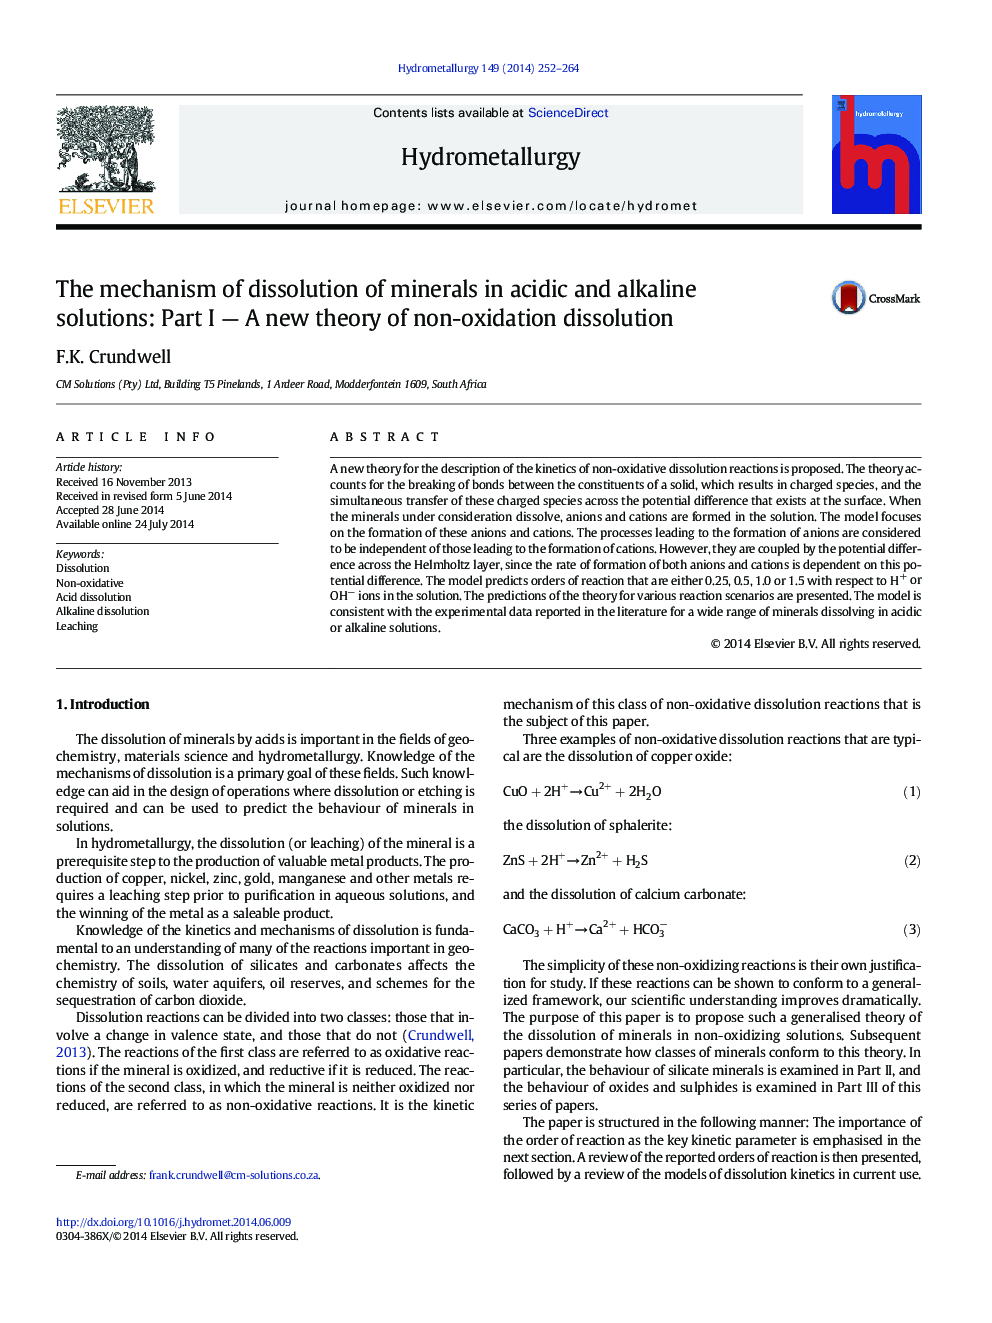 The mechanism of dissolution of minerals in acidic and alkaline solutions: Part I — A new theory of non-oxidation dissolution